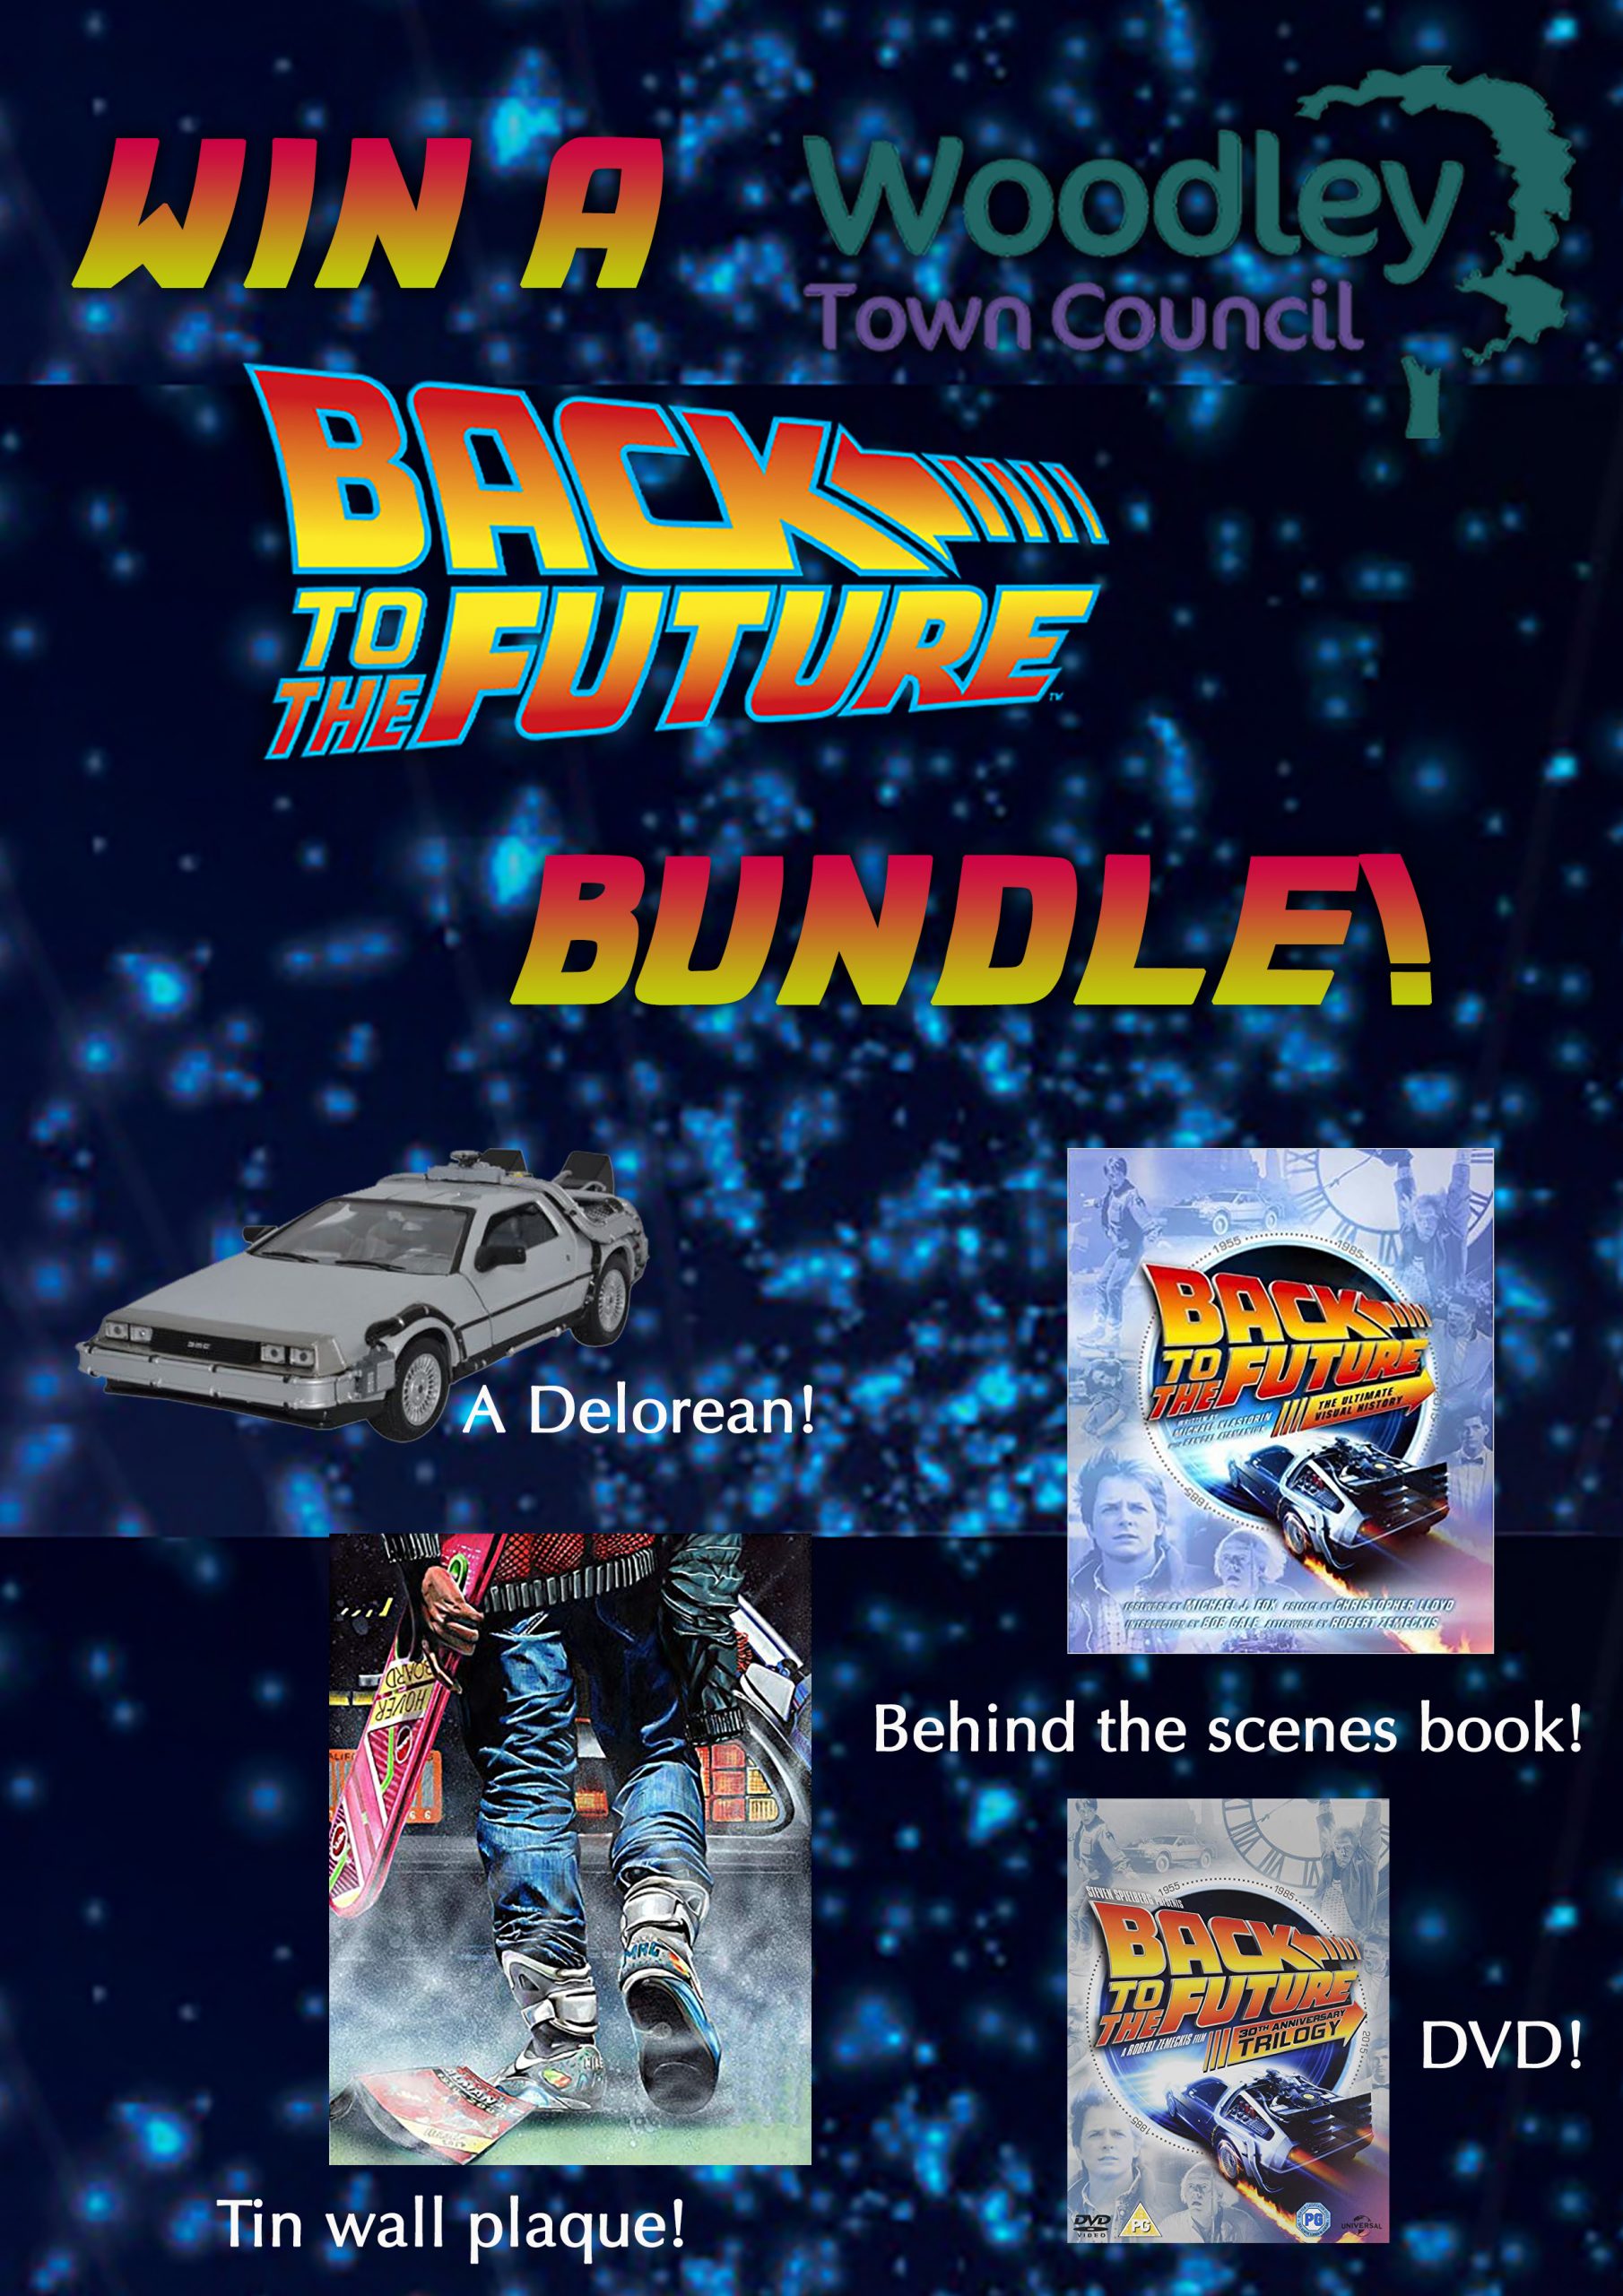 back to the future prize woodley town council